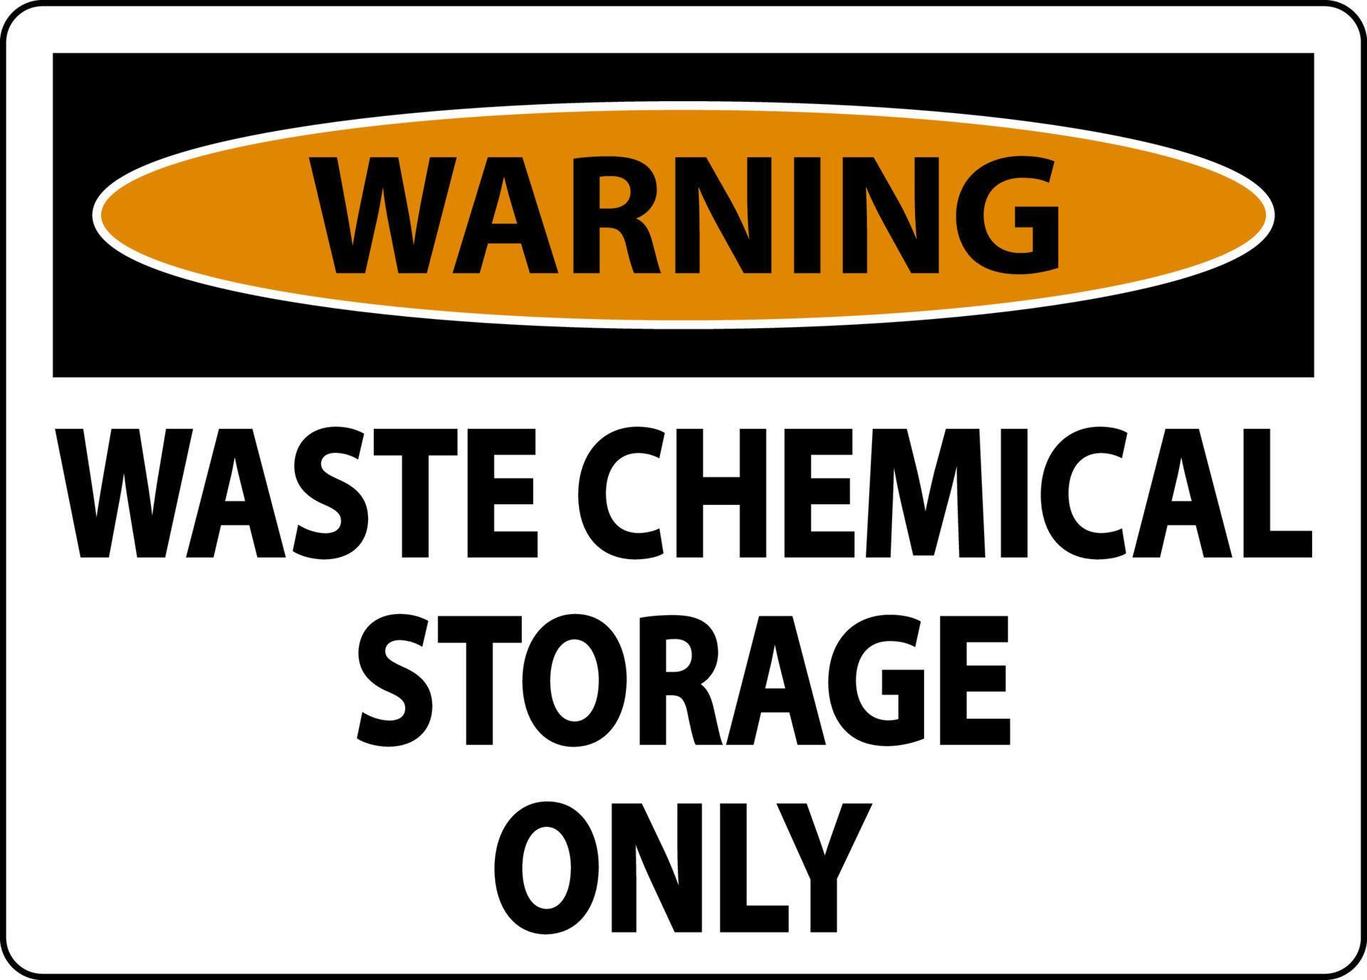 Warning Waste Chemical Storage Only Label vector